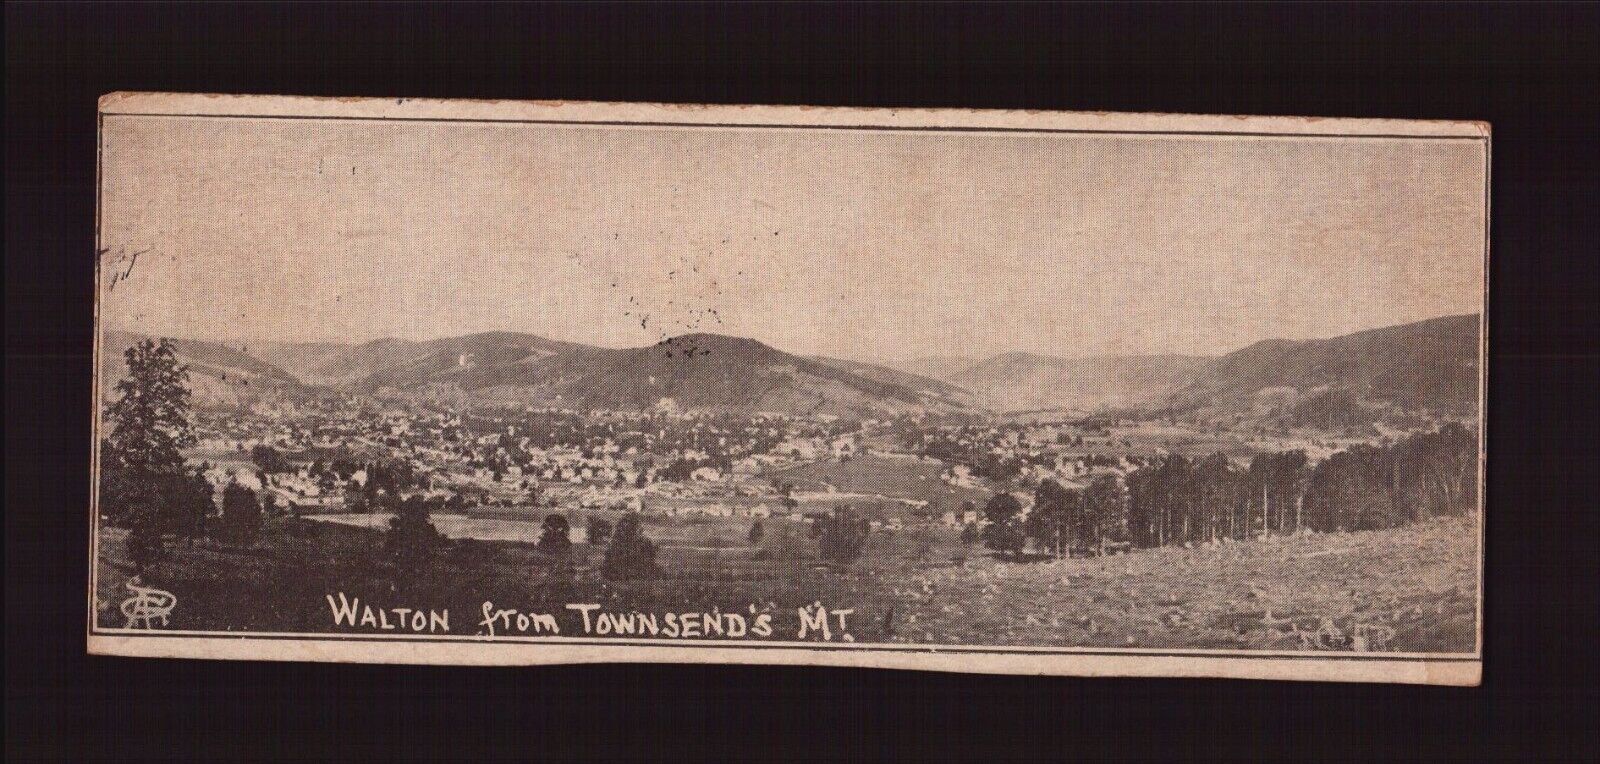 POSTCARD : NEW YORK - WALTON NY - TOWN VIEW FROM MT TOWNSEND 1905 CUT DOWN